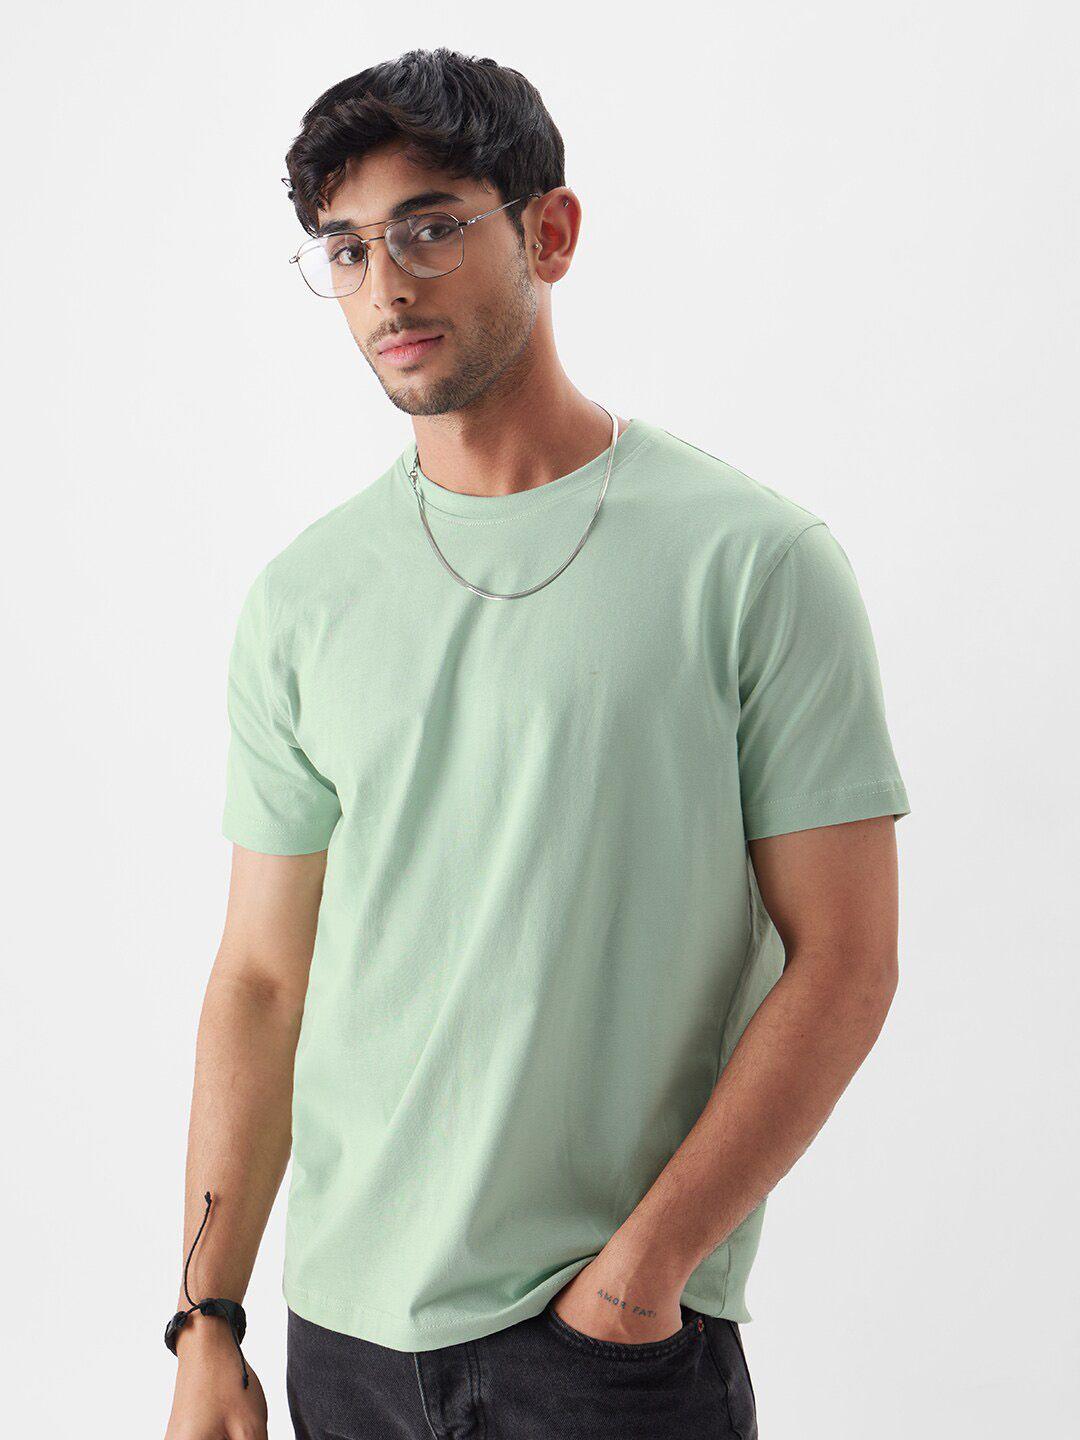 the souled store round neck cotton t-shirt